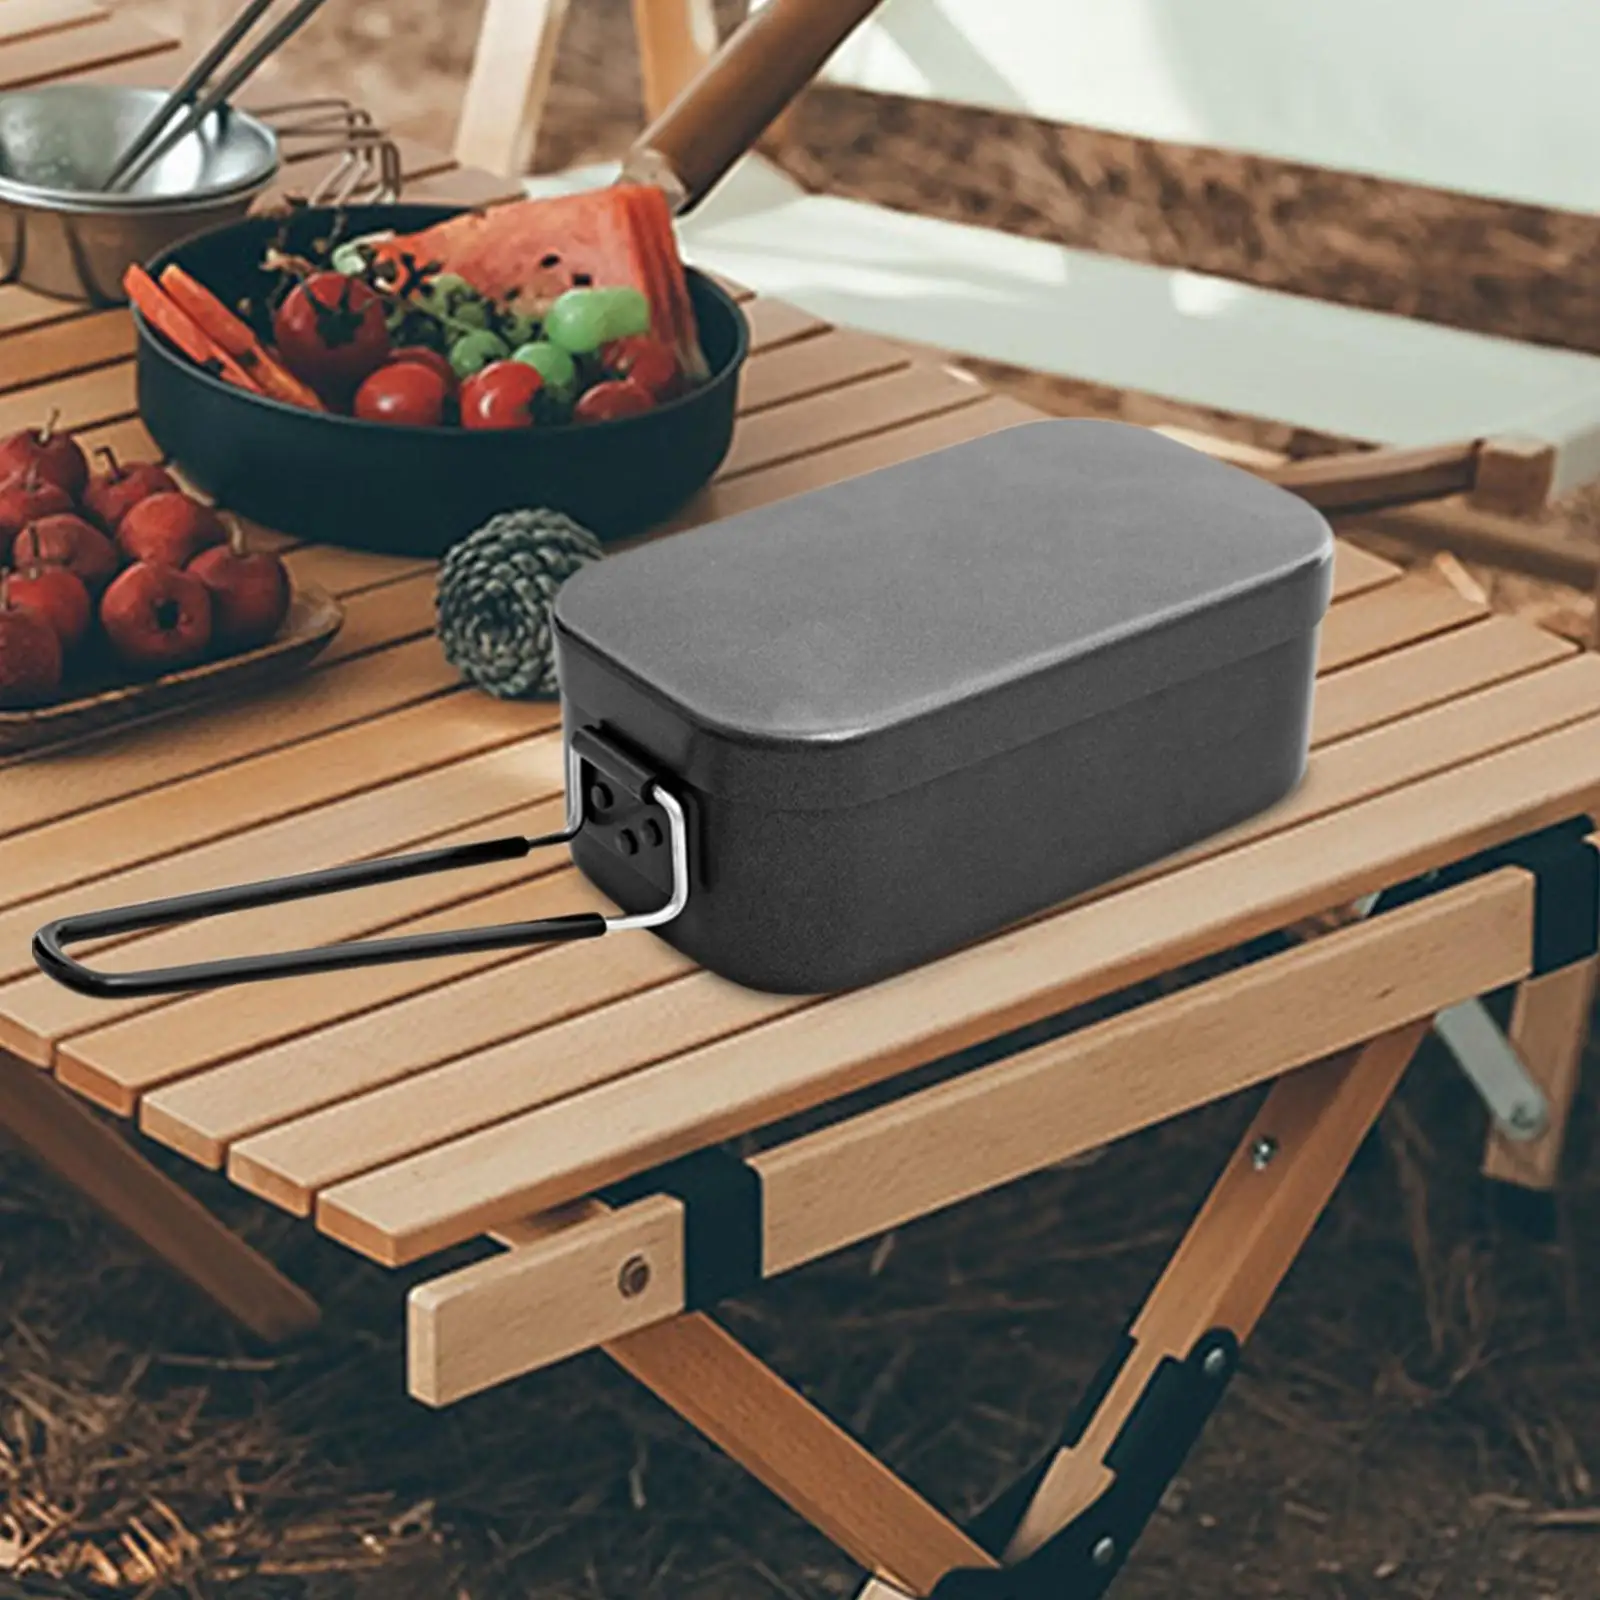 Outdoor Cooking Bento Box Rectangle Nonstick Sealed Stainless Steel Durable Leakproof Lunchbox for Hiking Picnic